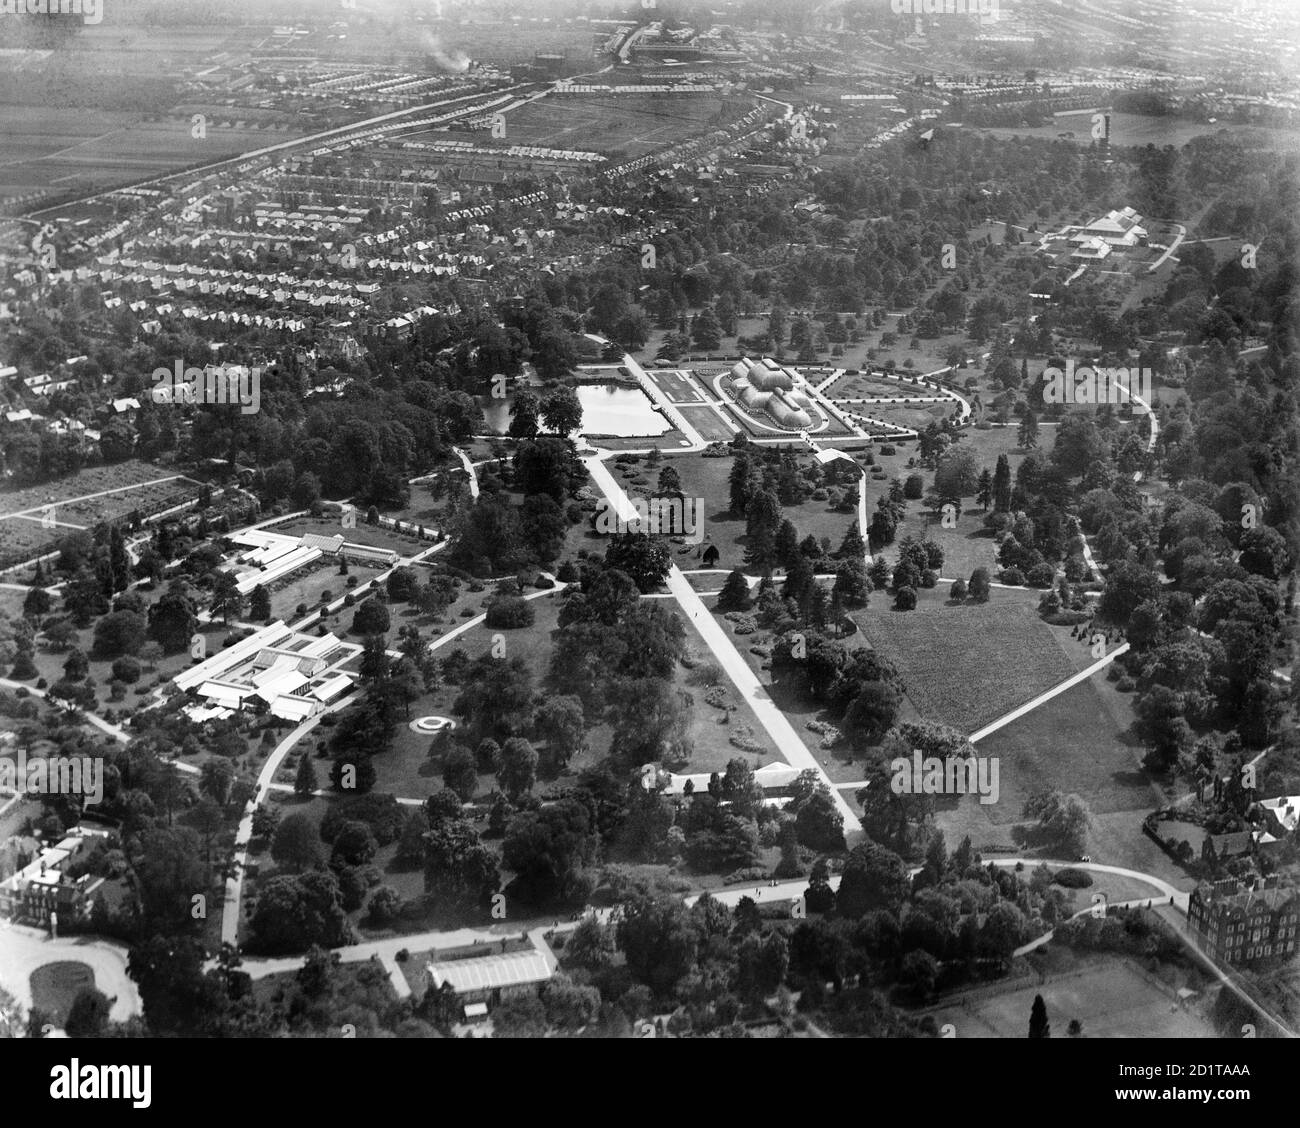 KEW GARDENS, London. Aerial view of the Royal Botanic Gardens at Kew, now a UNESCO World Heritage Site. Photographed in 1920. Aerofilms Collection (see Links). Stock Photo